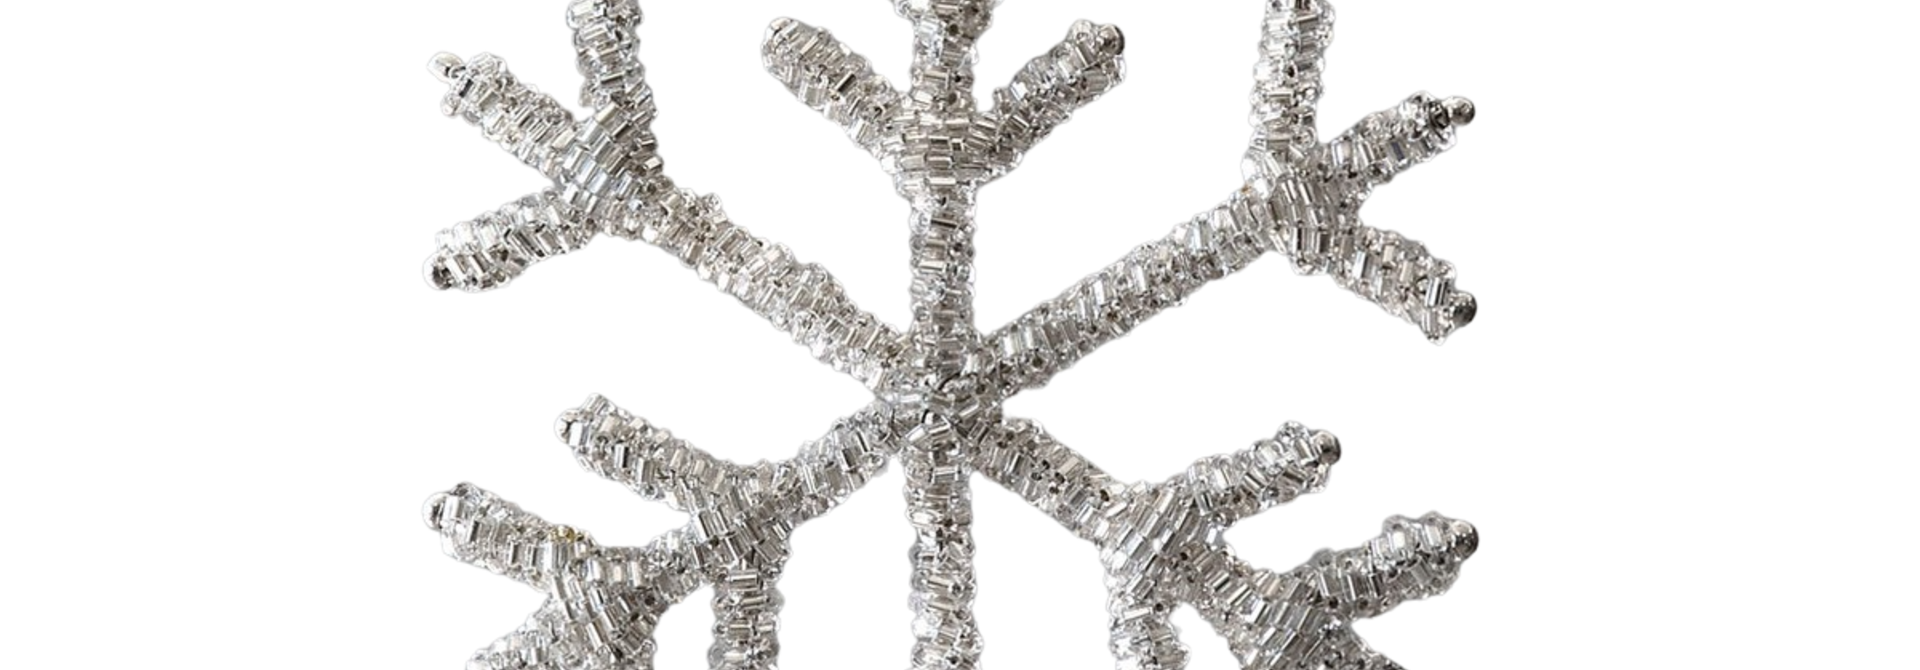 Jeweled Snowflake No. VI | The Holiday Ornament Collection - 4 Inch x 4.75 Inch x .25 Inch